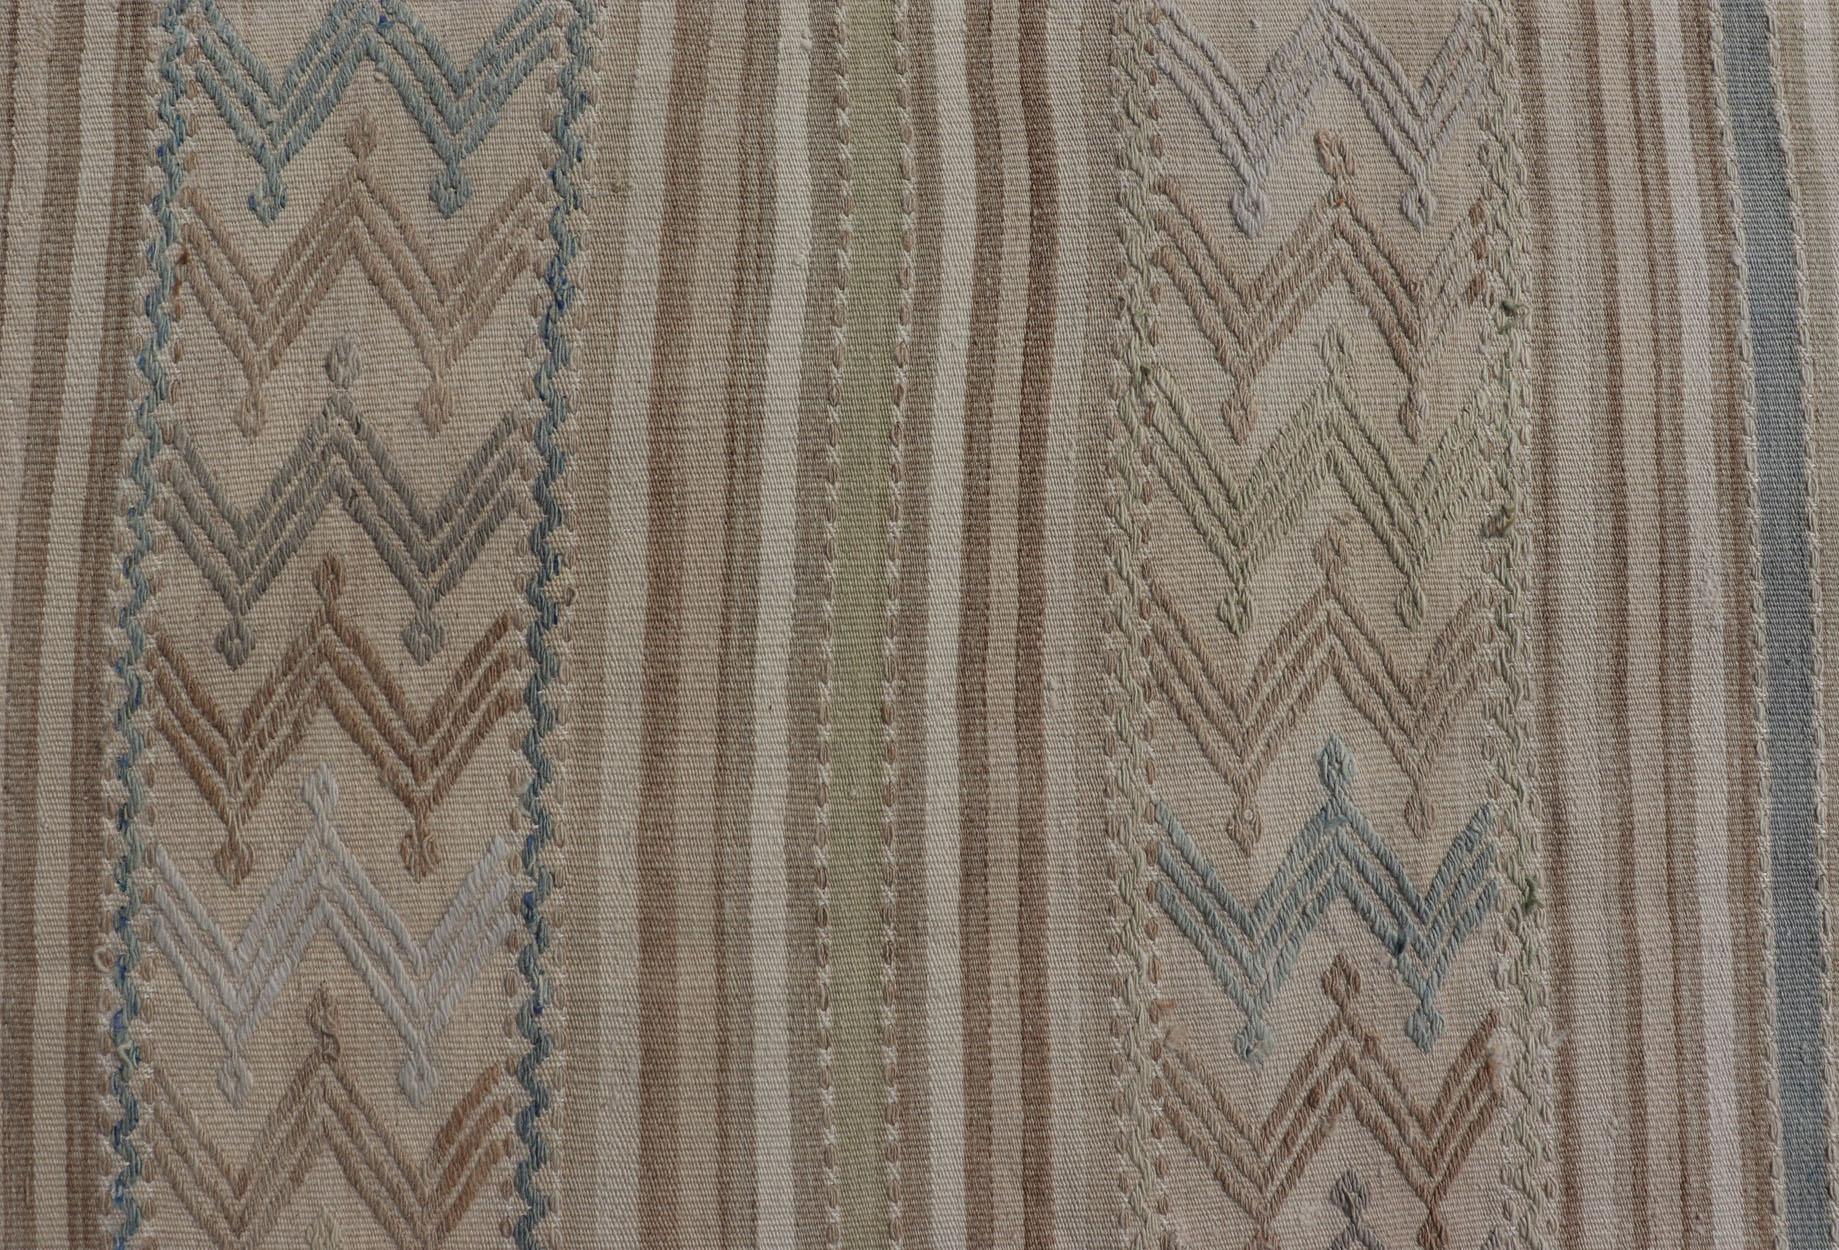 Vintage Turkish Flat-Weave Muted Colored Kilim in Taupe, Brown and Light Blue For Sale 4